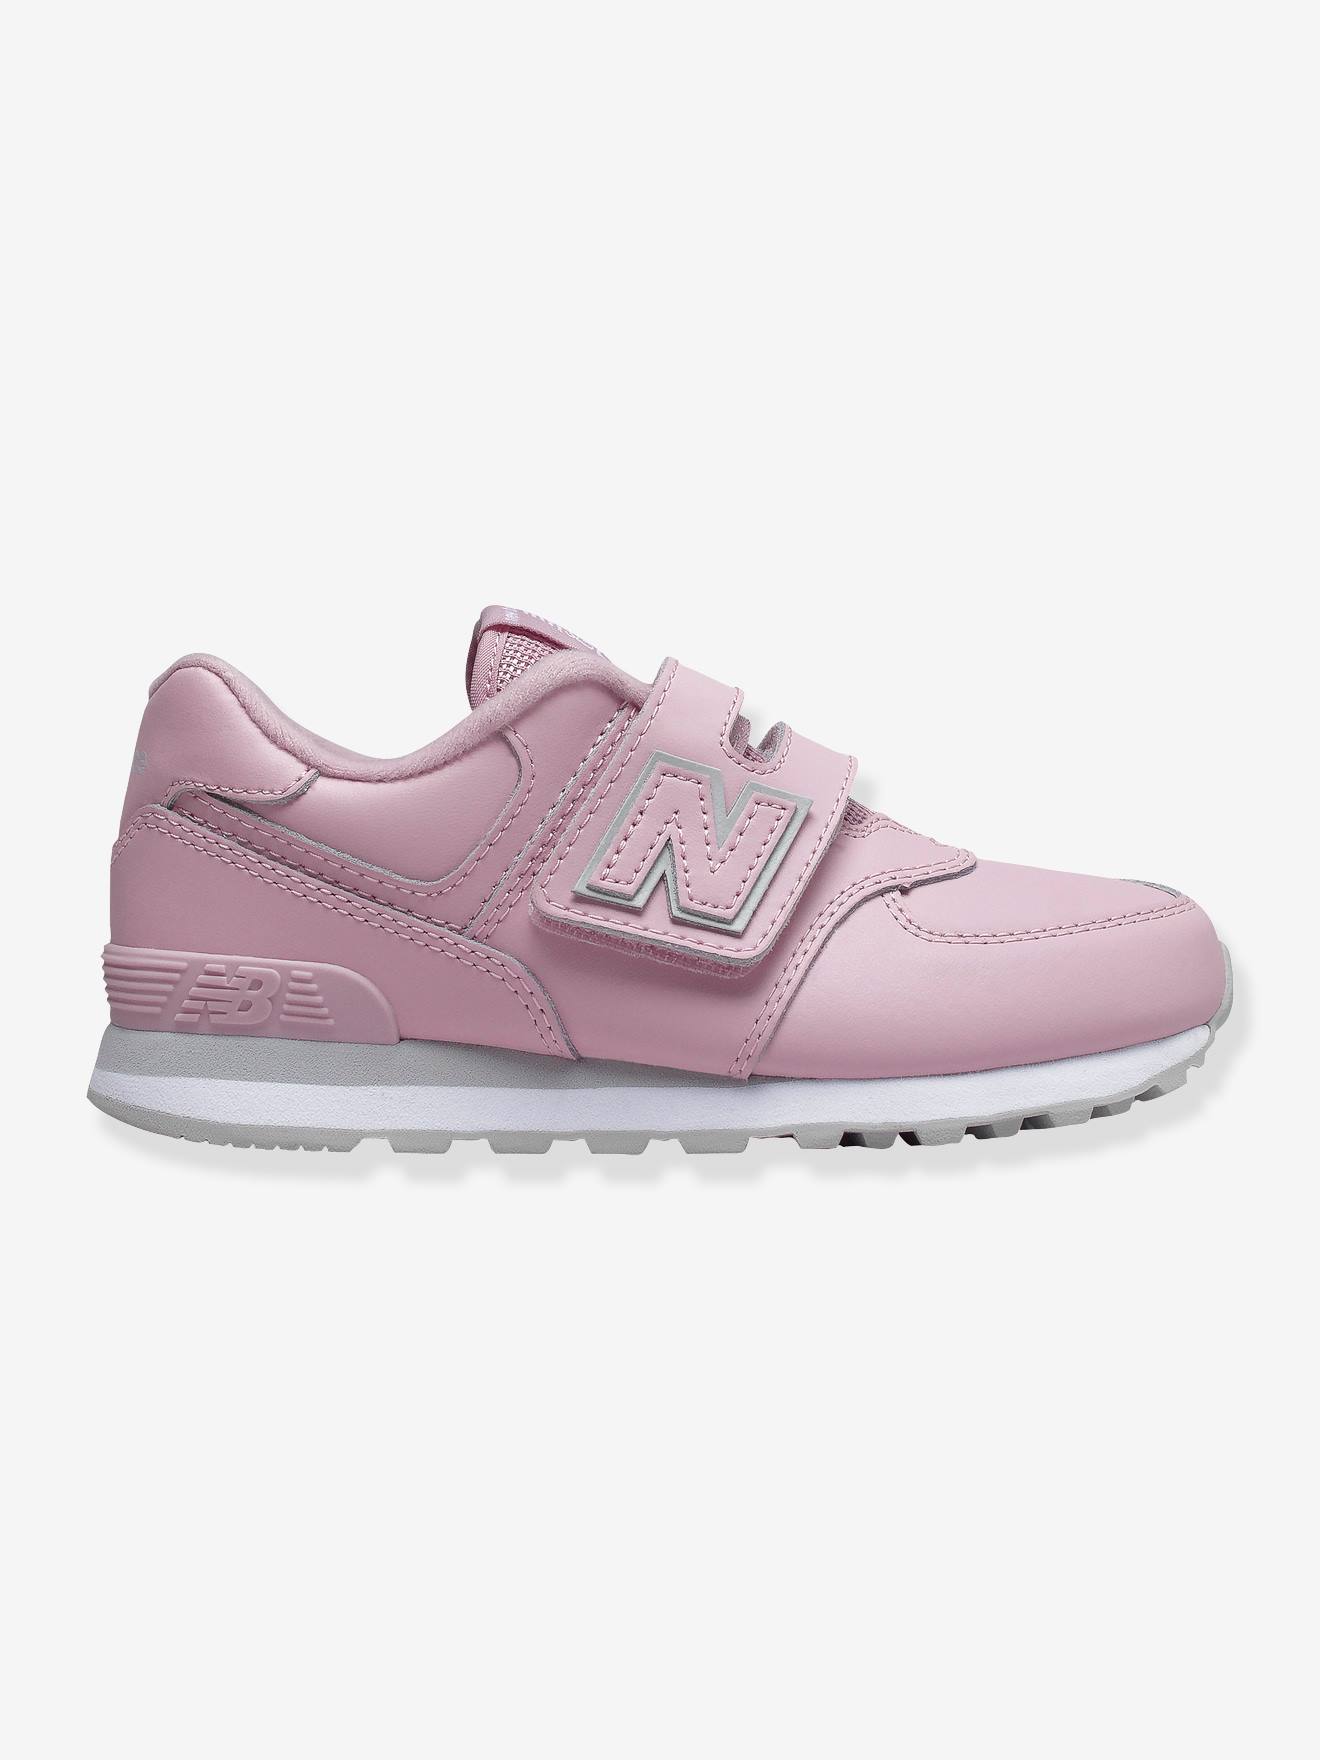 new balance fille scratch, OFF 75%,where to buy!